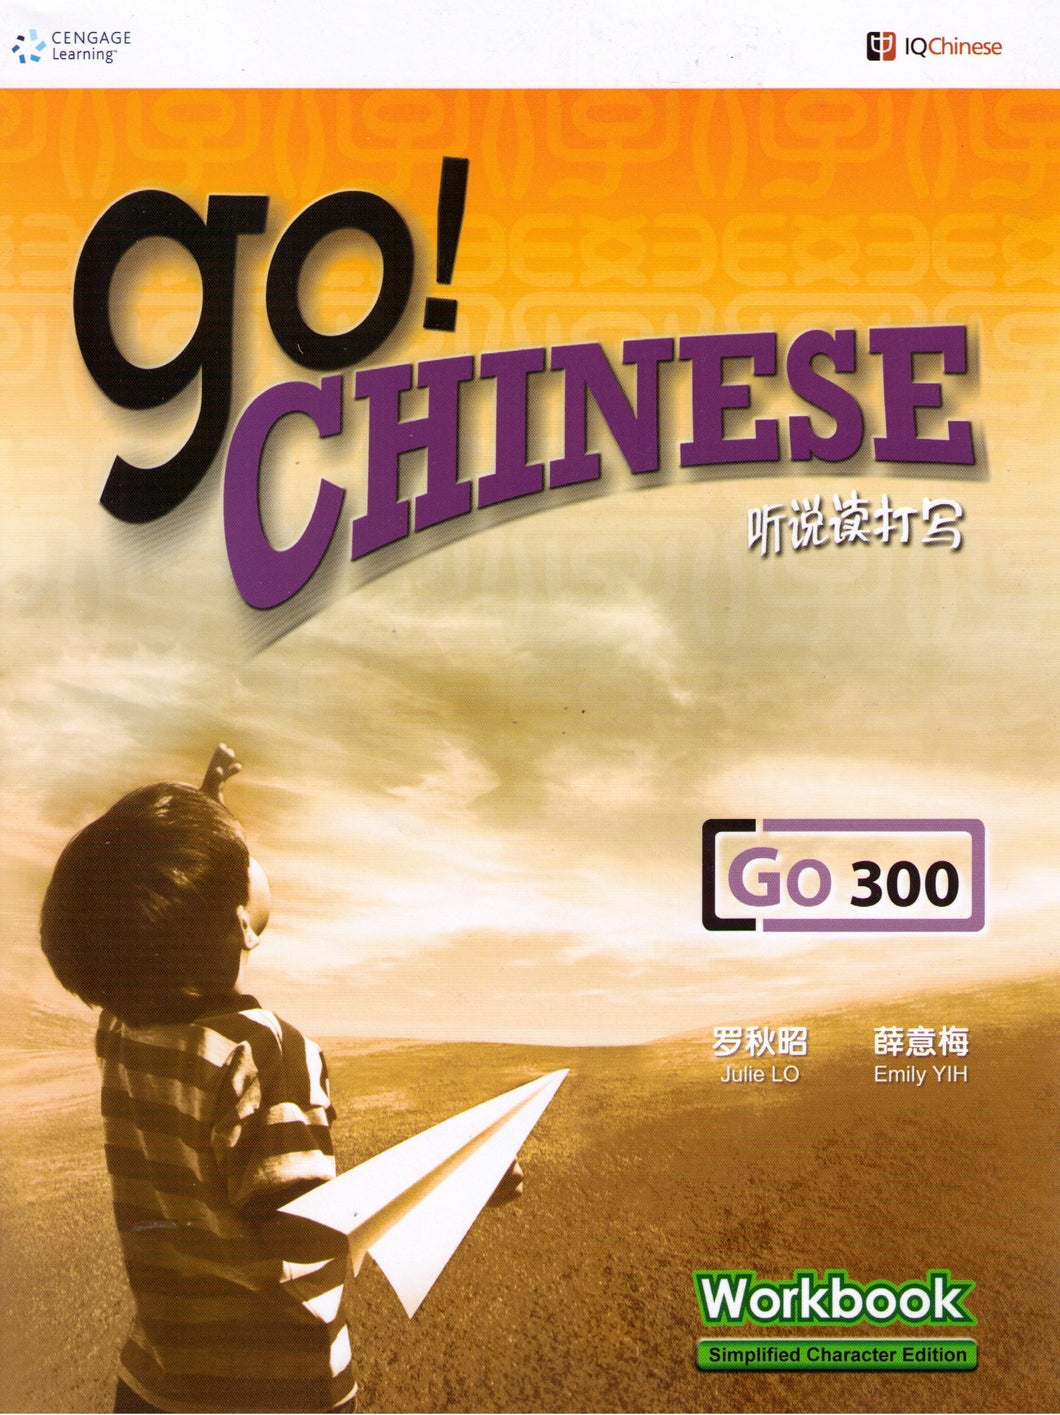 Go Chinese and IQ Chinese 300-Workbook-Simplified